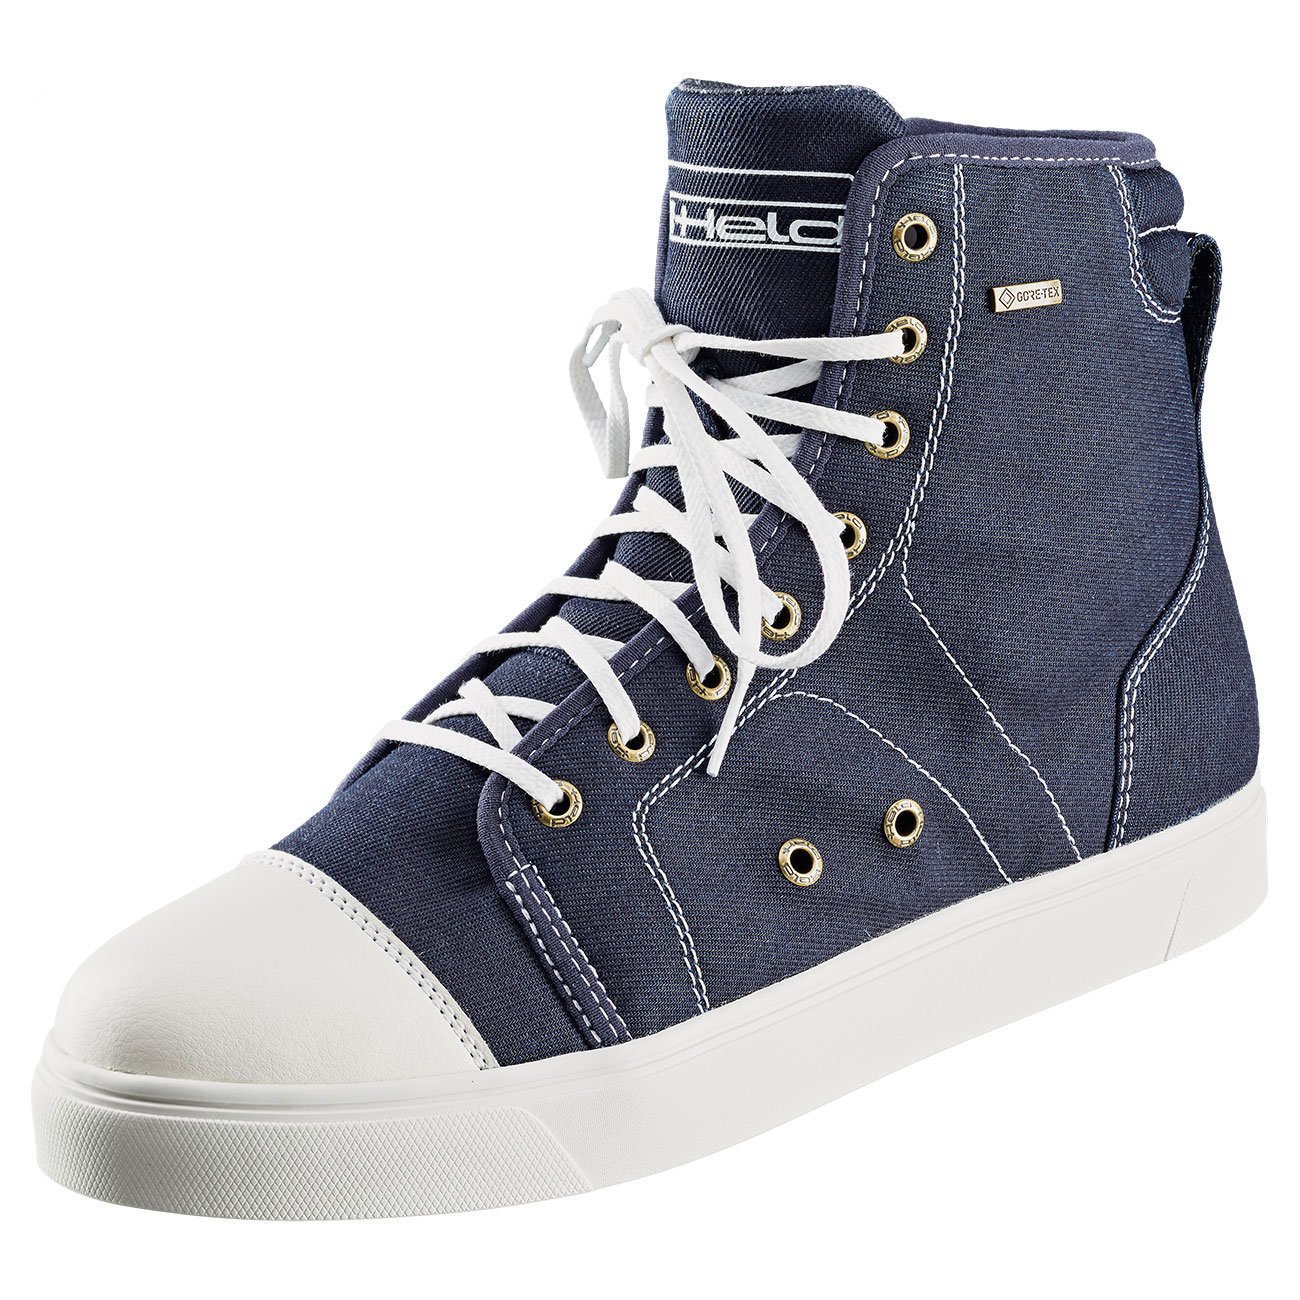 Image of Held College Rider GTX Blue Size 37 ID 4049462915008